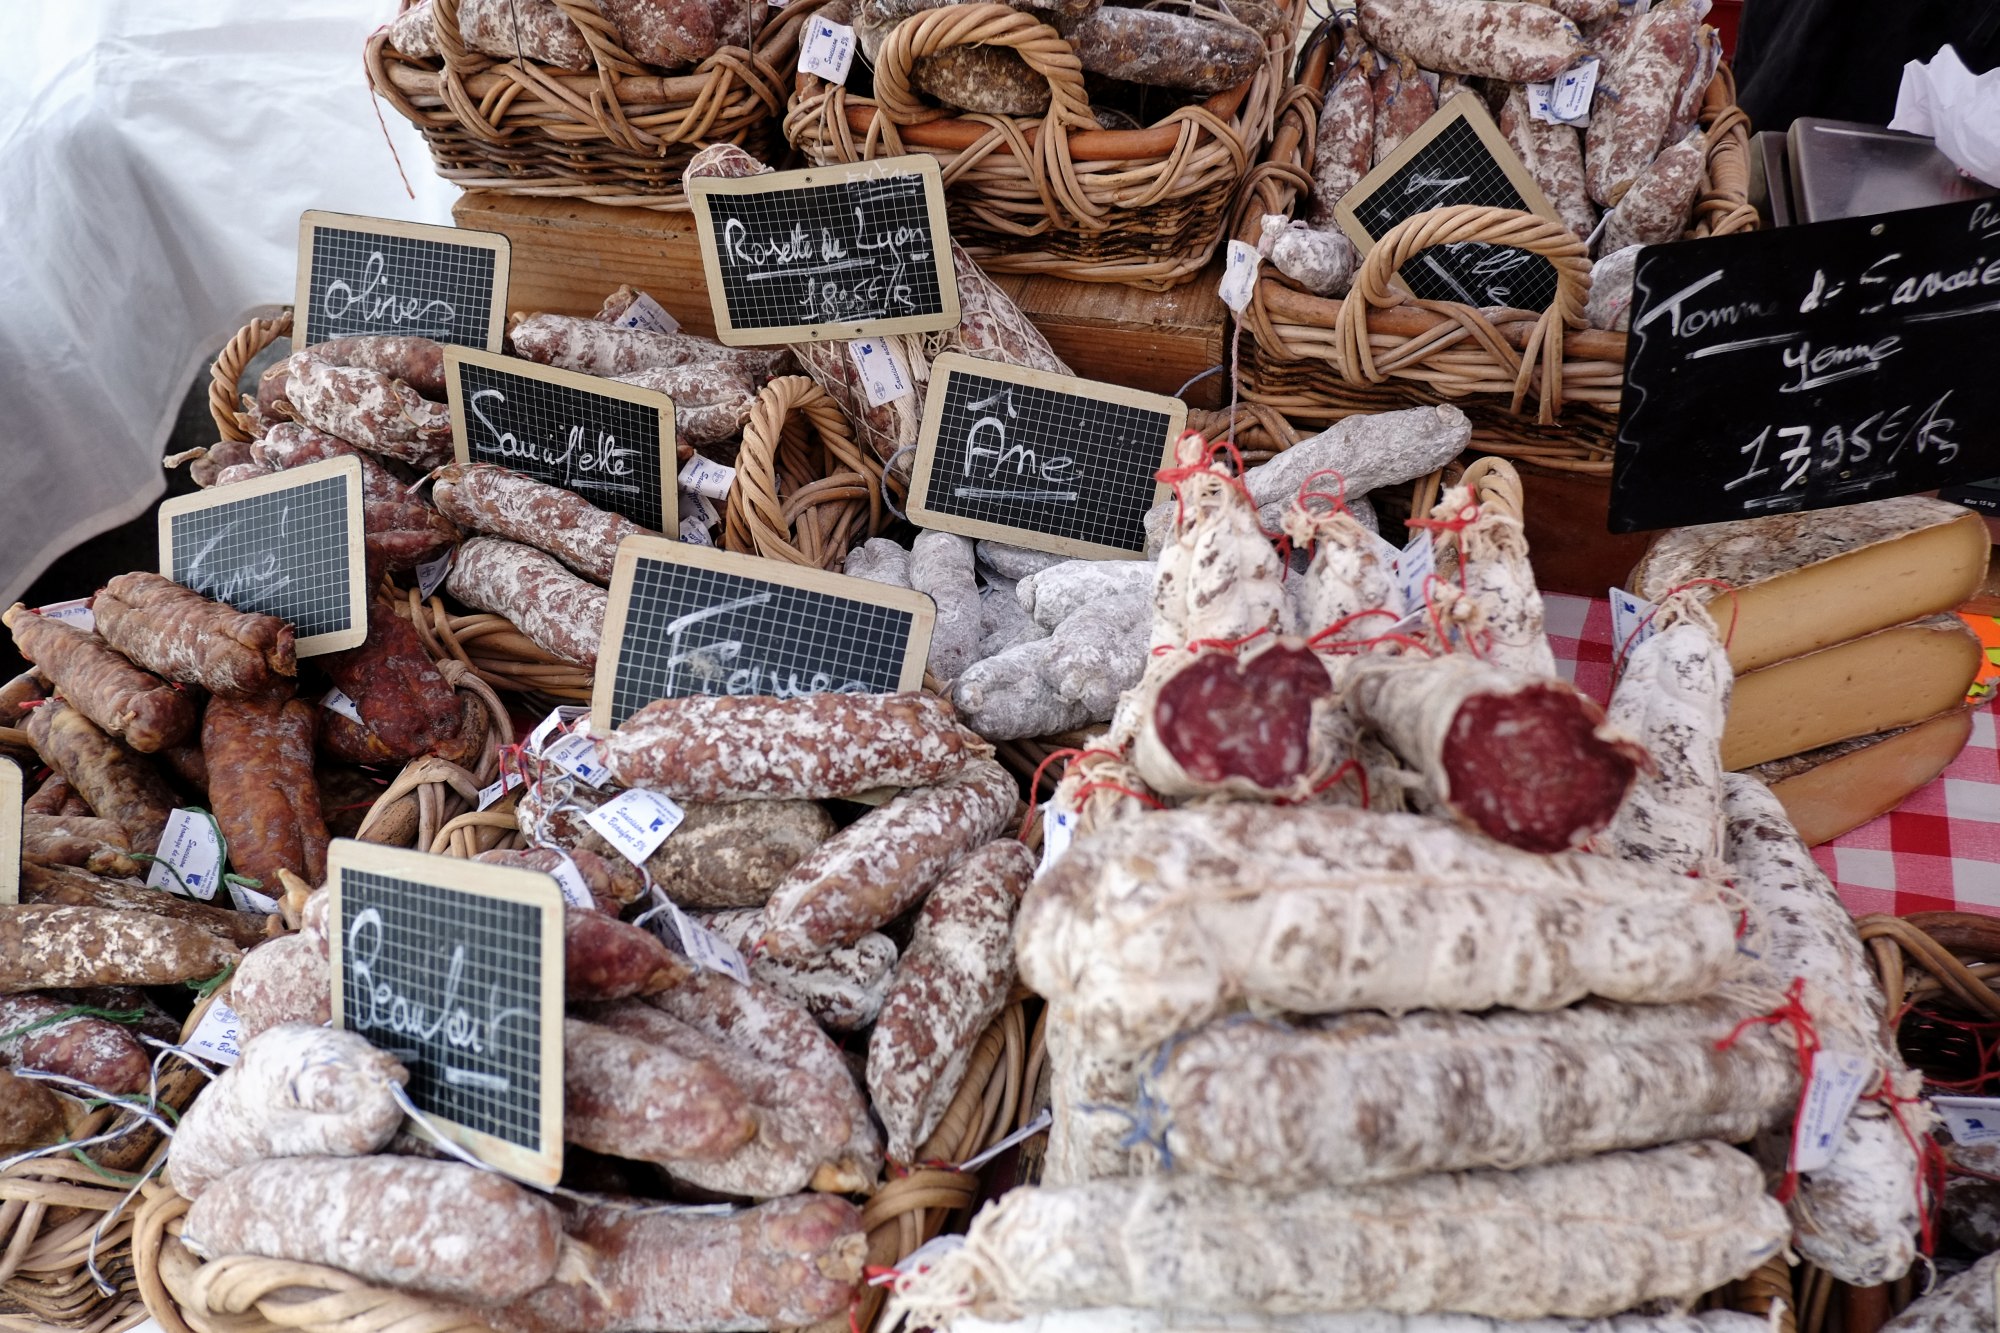 A wide variety of French Saucisson, sausages market day in Le Bois-d'Oingt. Food and travel lifestyle photography by Kent Johnson.